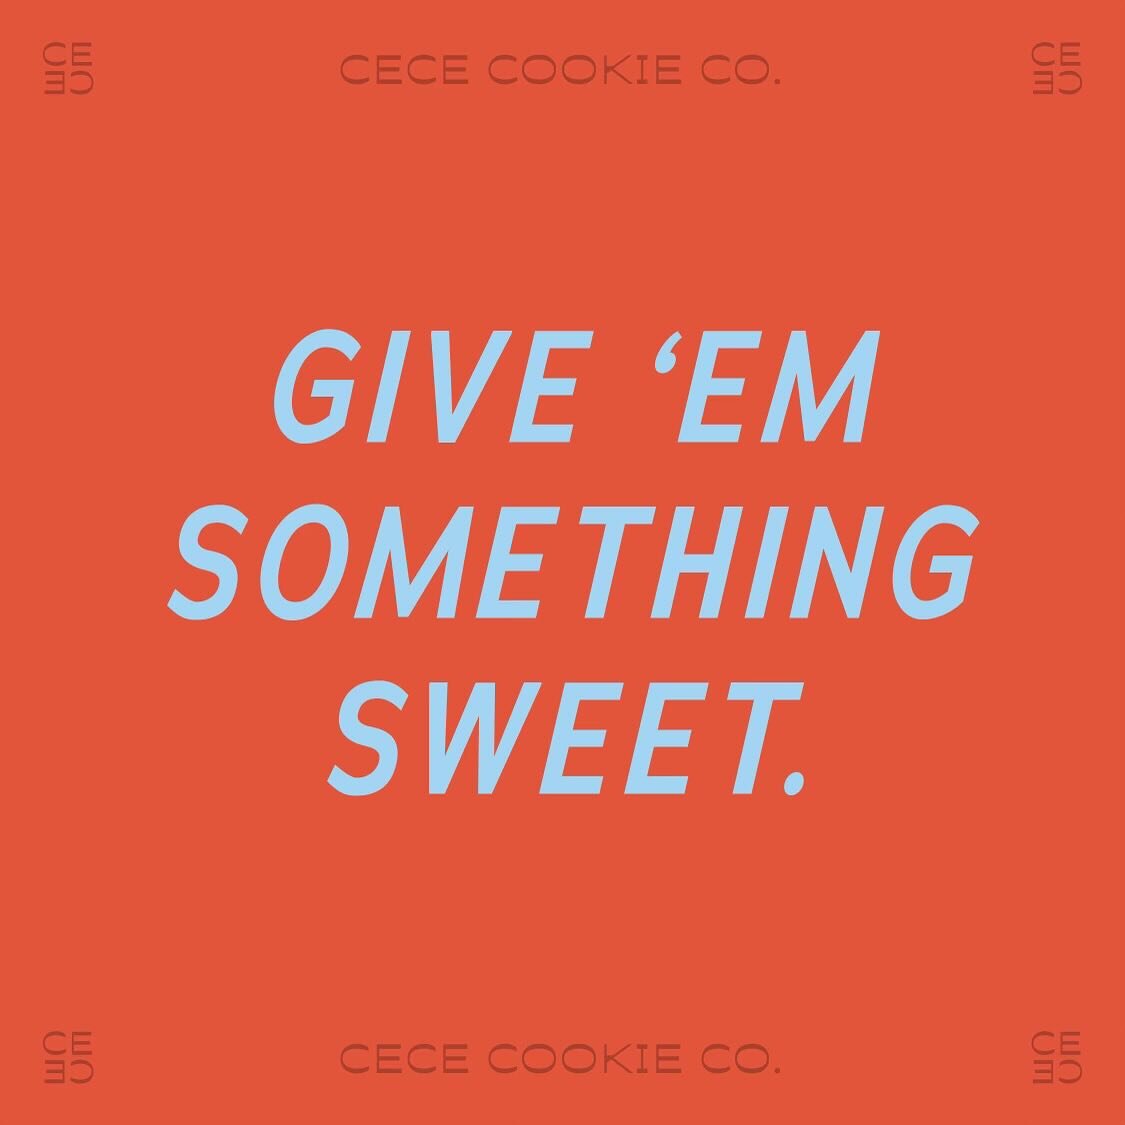 Here&rsquo;s a sweet little taste of an identity package we recently boxed up for @cececookieco We threw an electric color combination, welcoming typography and minimalist illustrations into a bowl, added two eggs, and voila - the beginnings of a bra